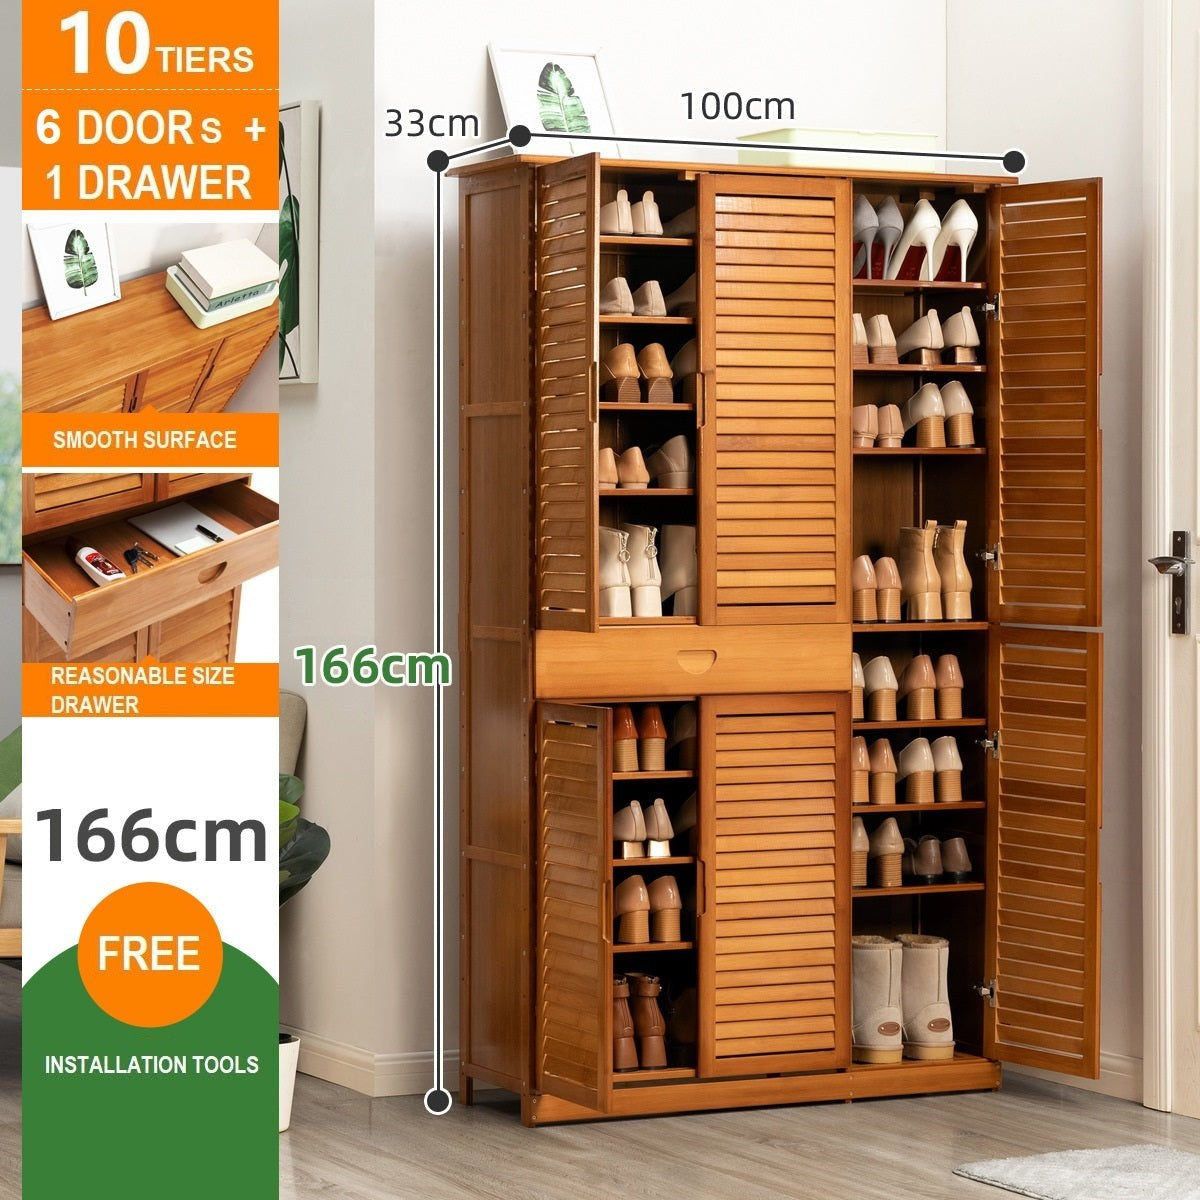 Lecoi 10 Tier & 4 Door Bamboo Shoe Rack Cabinet with 1 Drawer - Natural - Notbrand